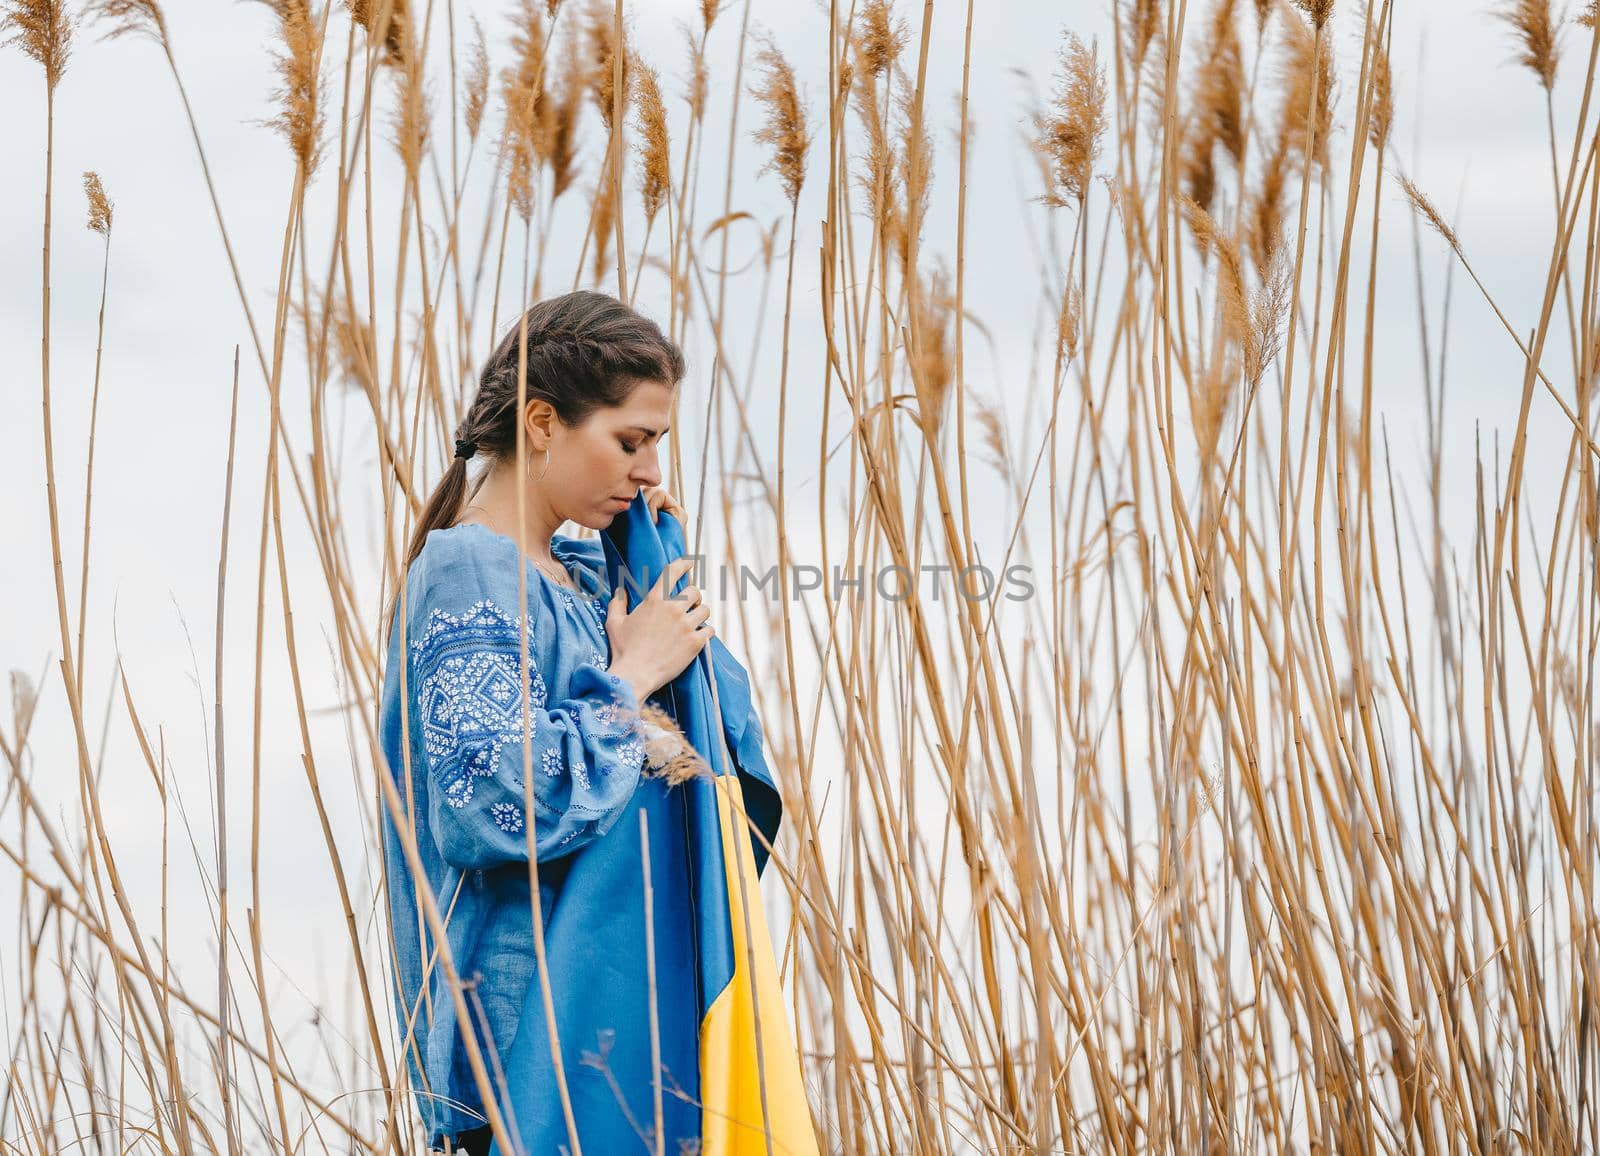 Sorrowful ukrainian woman with national flag on natural reeds background. Lady in blue embroidery vyshyvanka blouse. Ukraine, independence, freedom, patriot symbol, victory in war. High quality photo